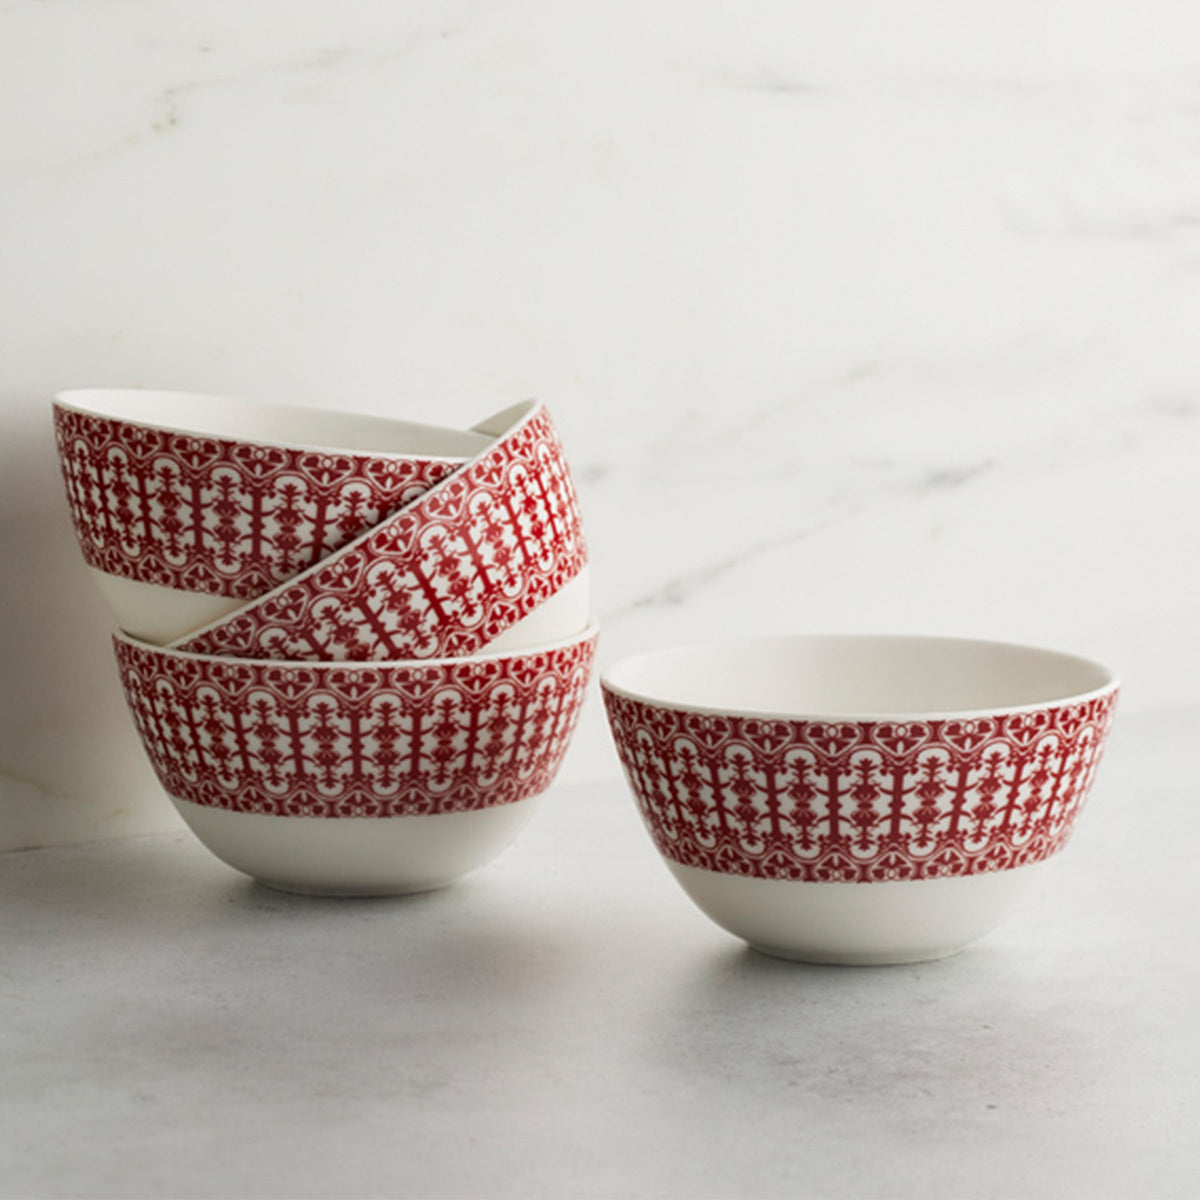 Four Caskata Casablanca Crimson Cereal Bowls are stacked on a marble surface against a white background.